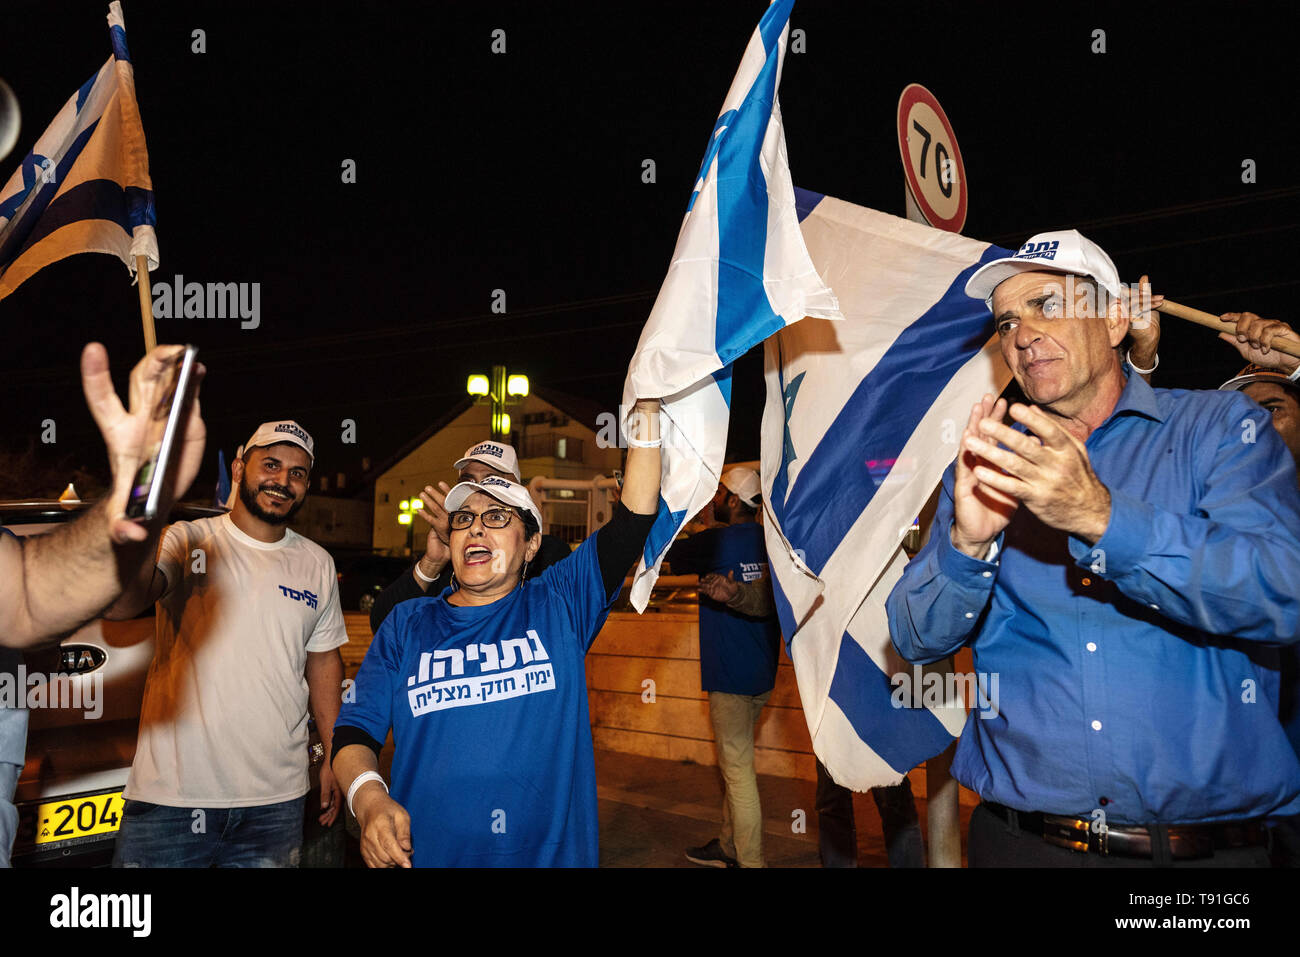 April 7, 2019 - Be'Er Sheva, Israel - Members seen with flags shouting slogans during the rally.Members of the Israeli Likud Party rally in support of Prime Minister, Benjamin Netanyahu, in Be'er Sheva, Israel. Credit: Ronen Tivony/SOPA Images/ZUMA Wire/Alamy Live News Stock Photo